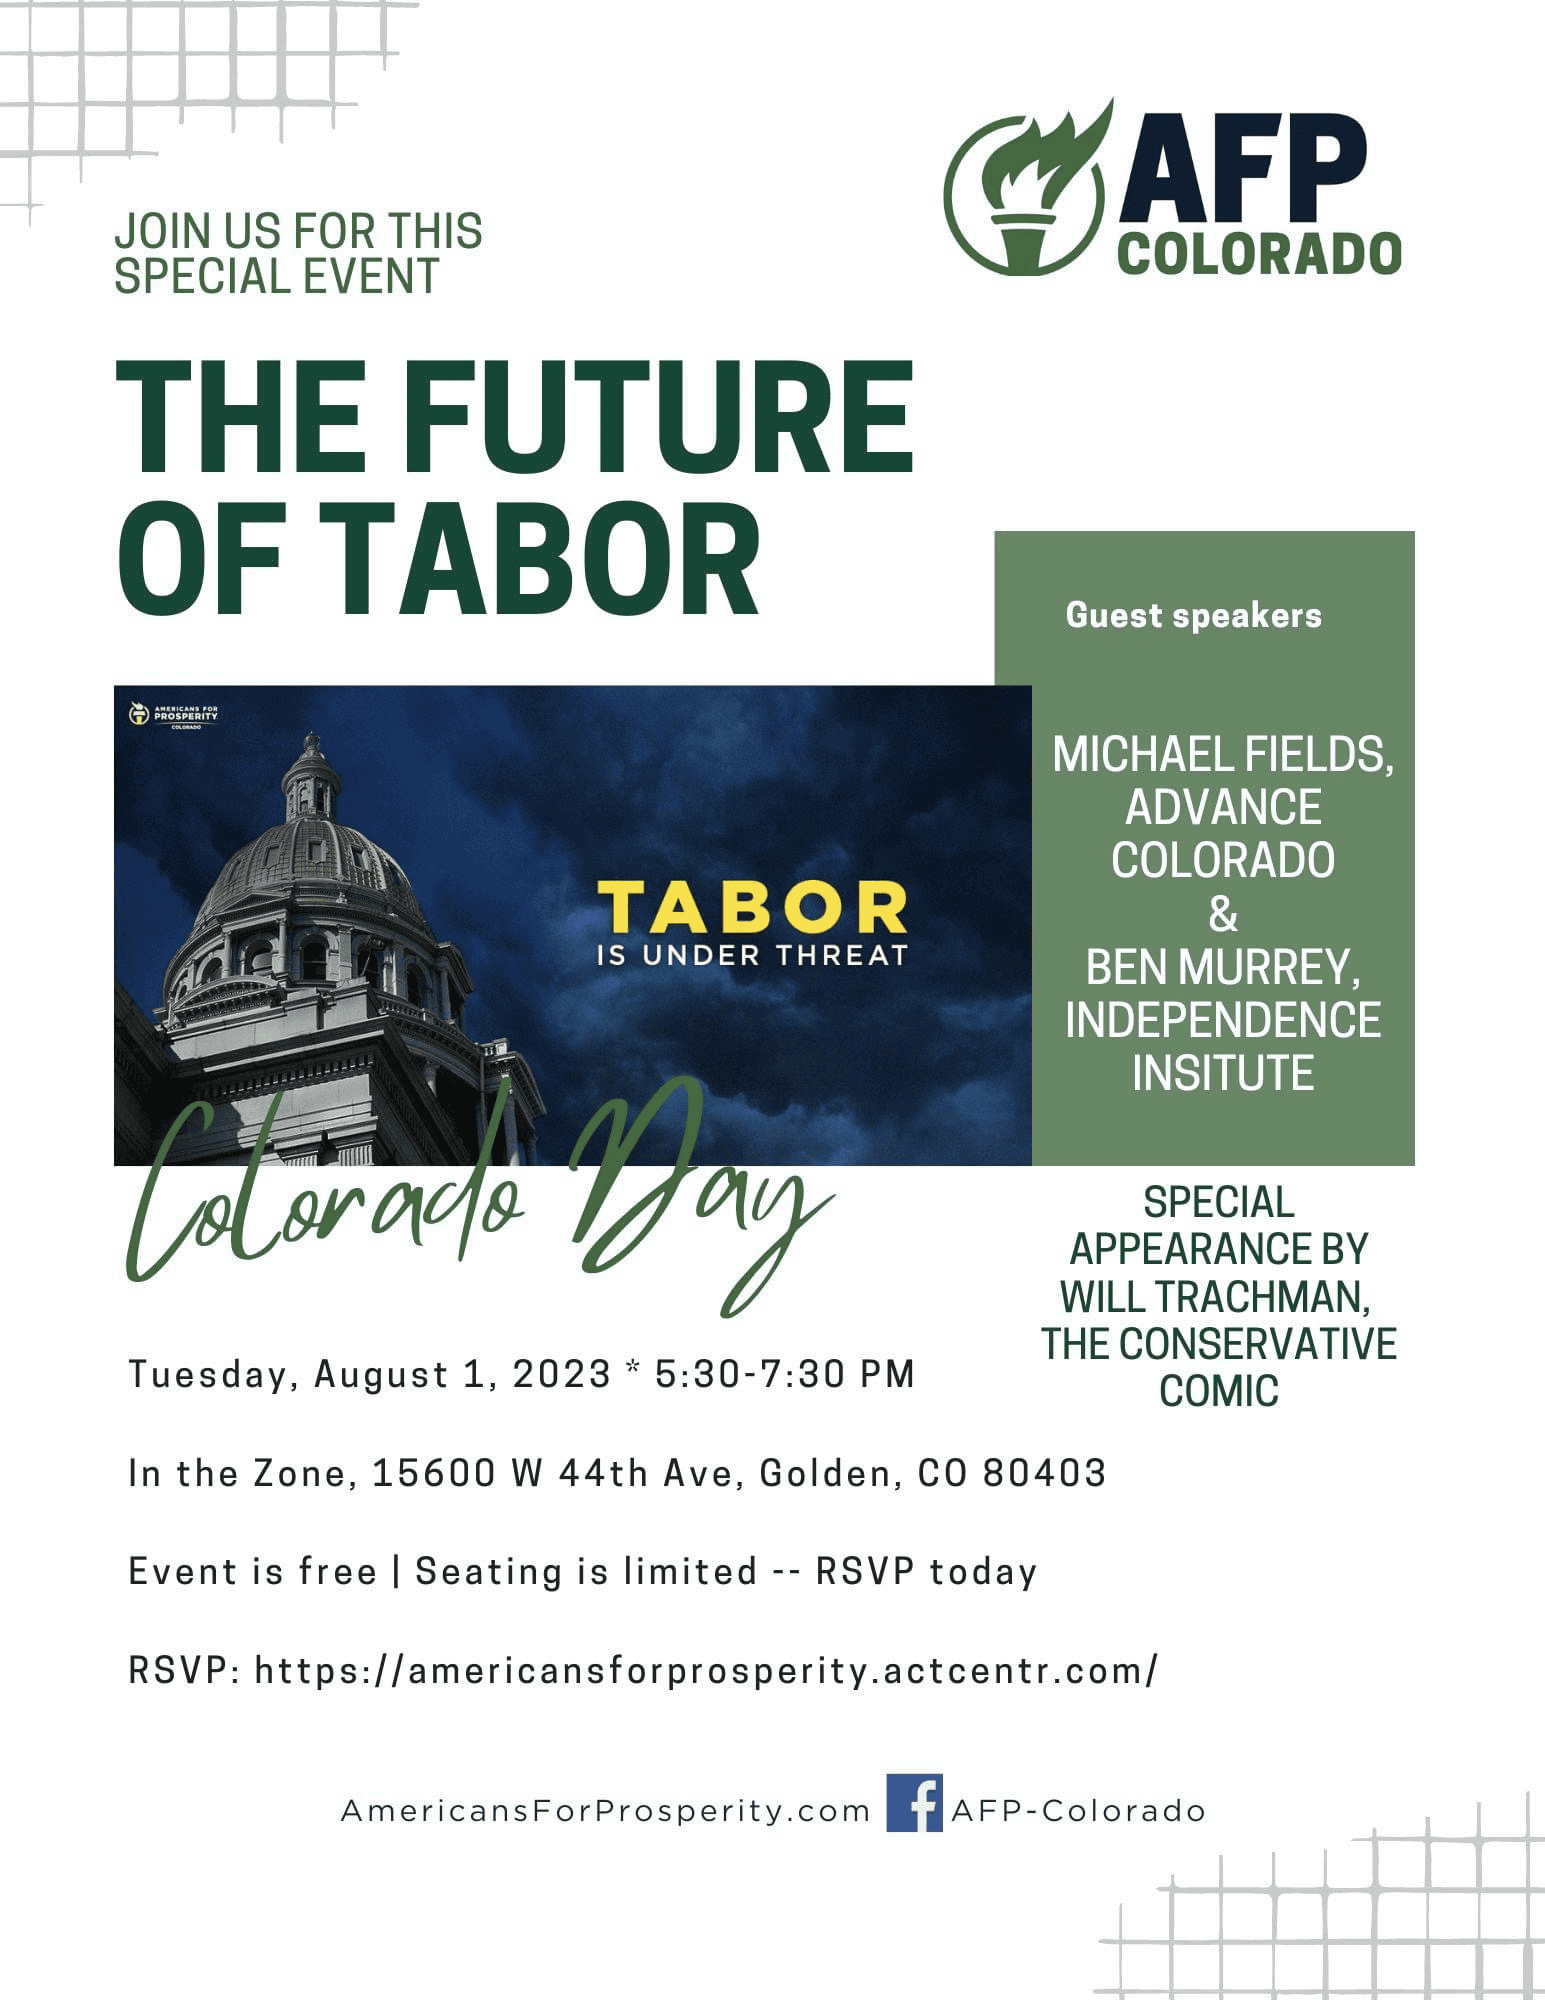 The future of TABOR is under Threat.